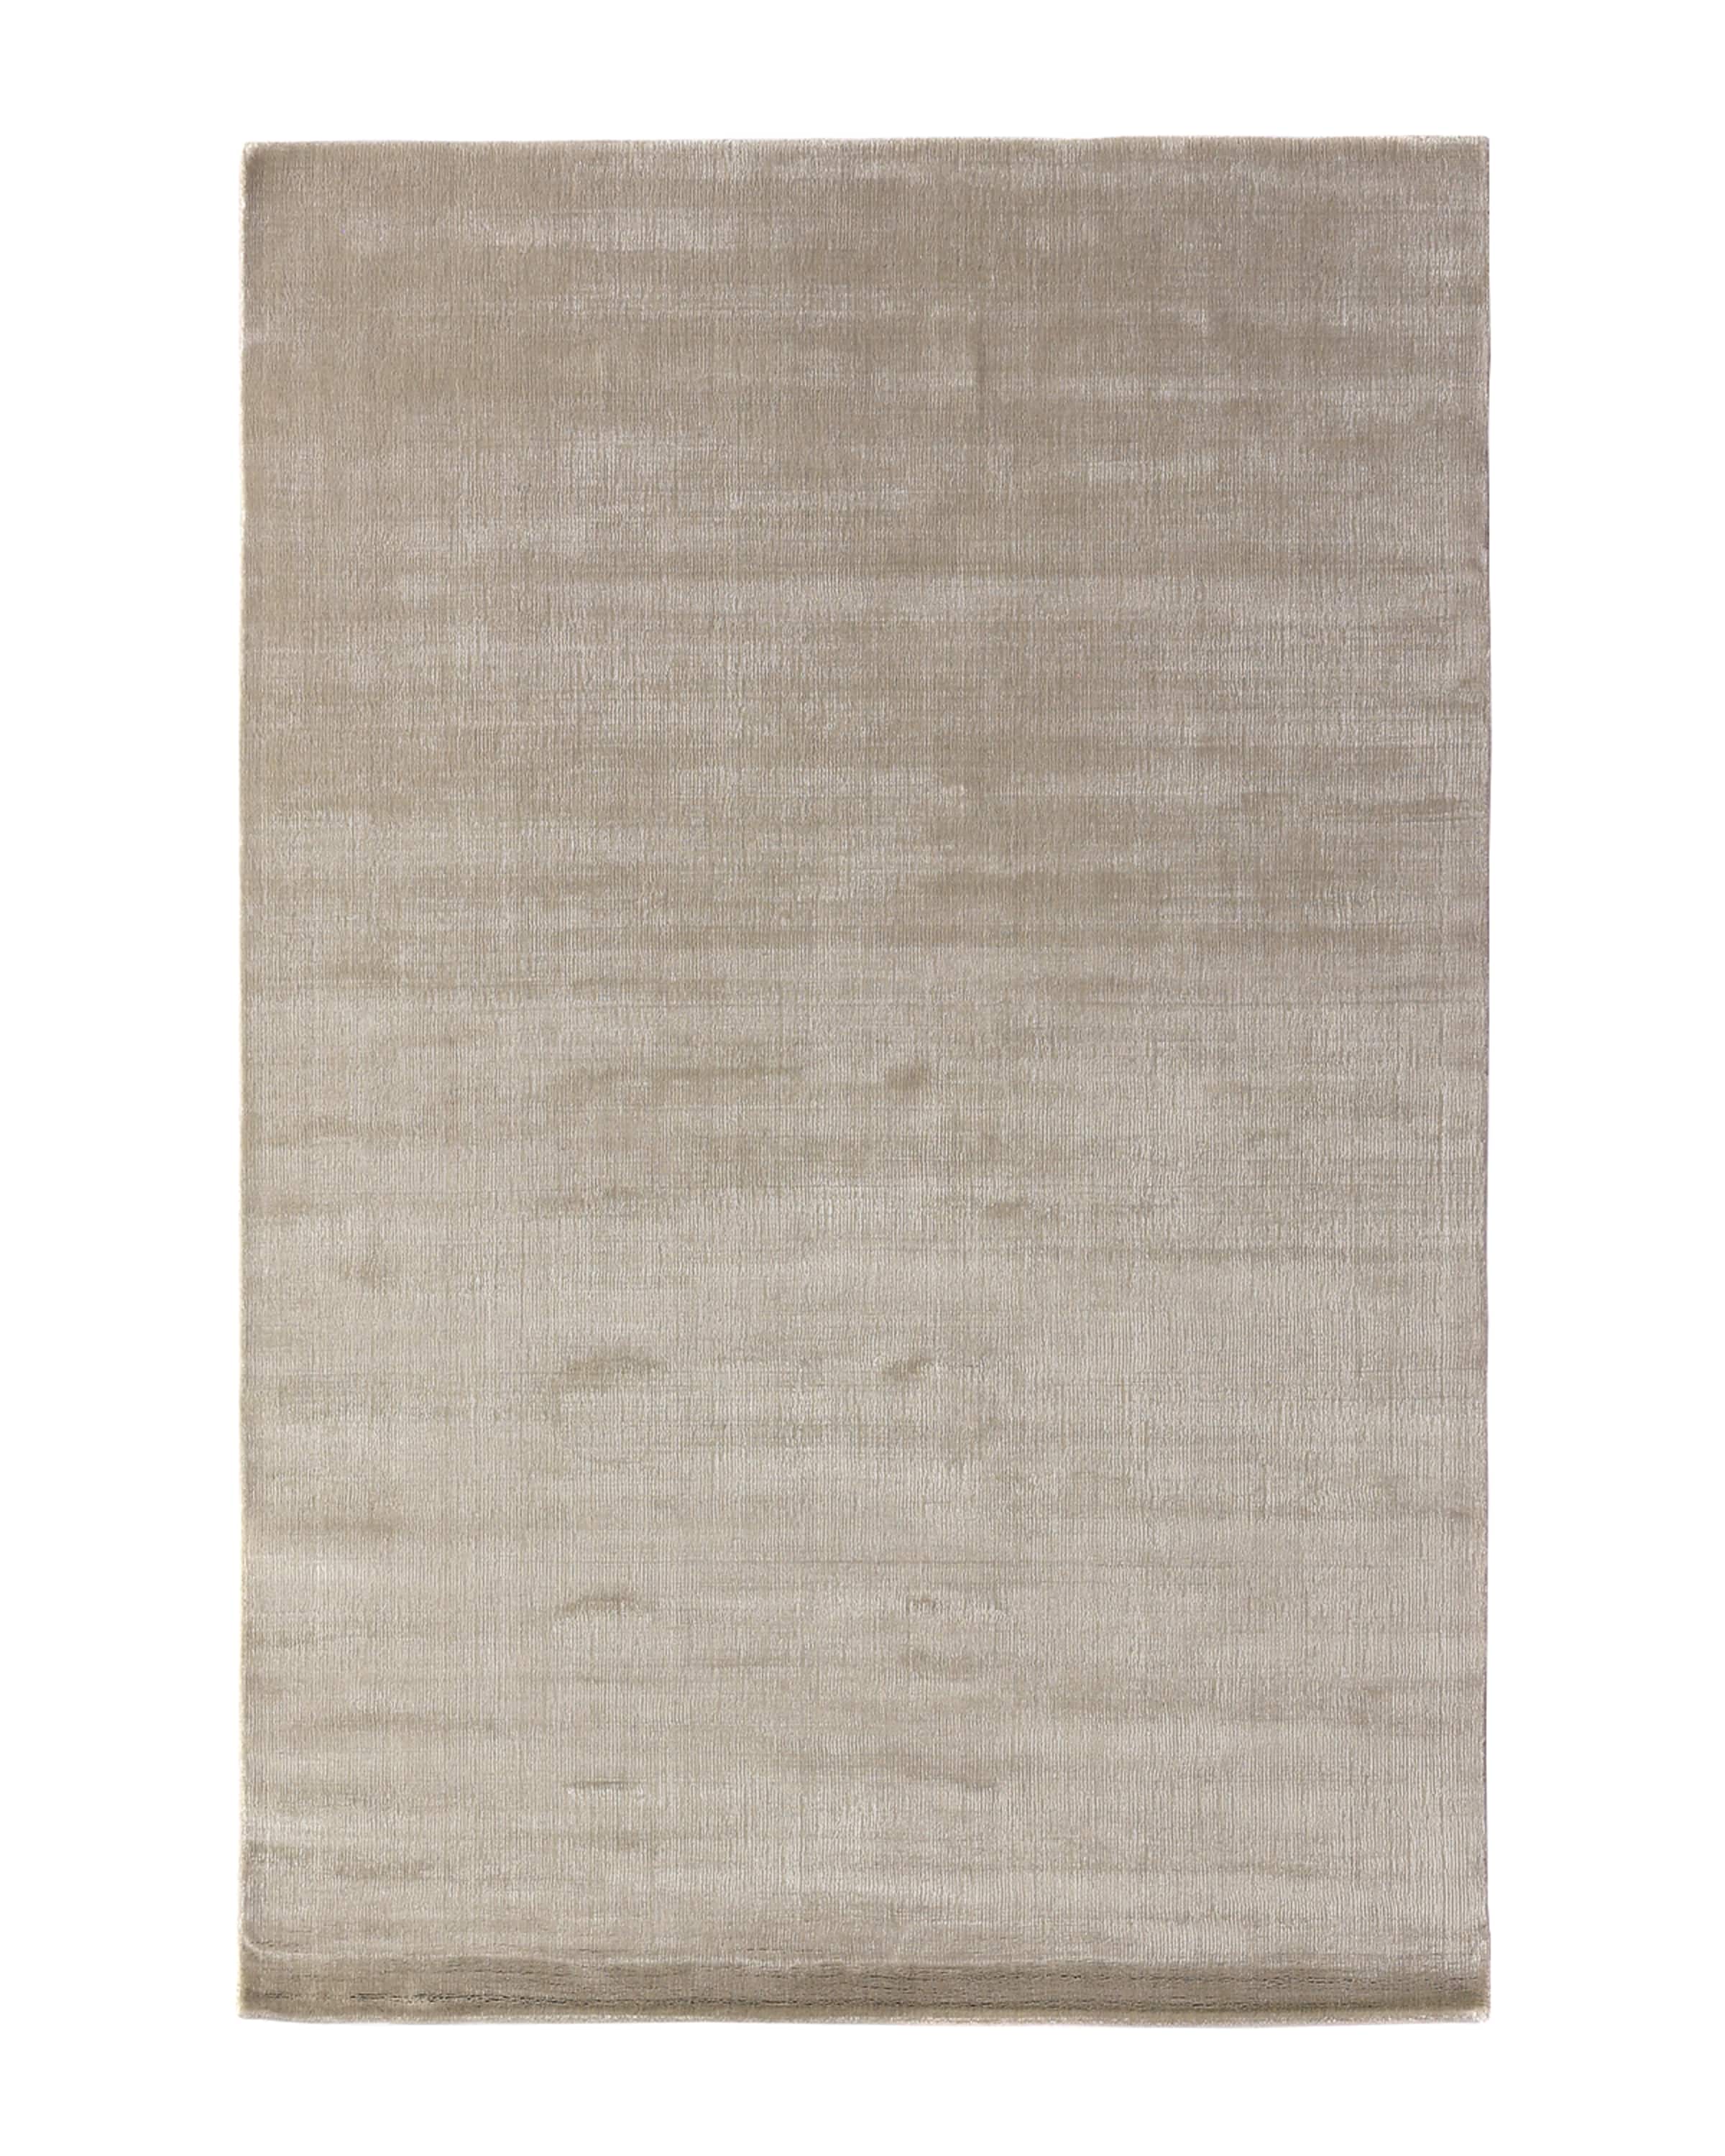 Exquisite Rugs Gwendolyn Rug, 12' x 15'